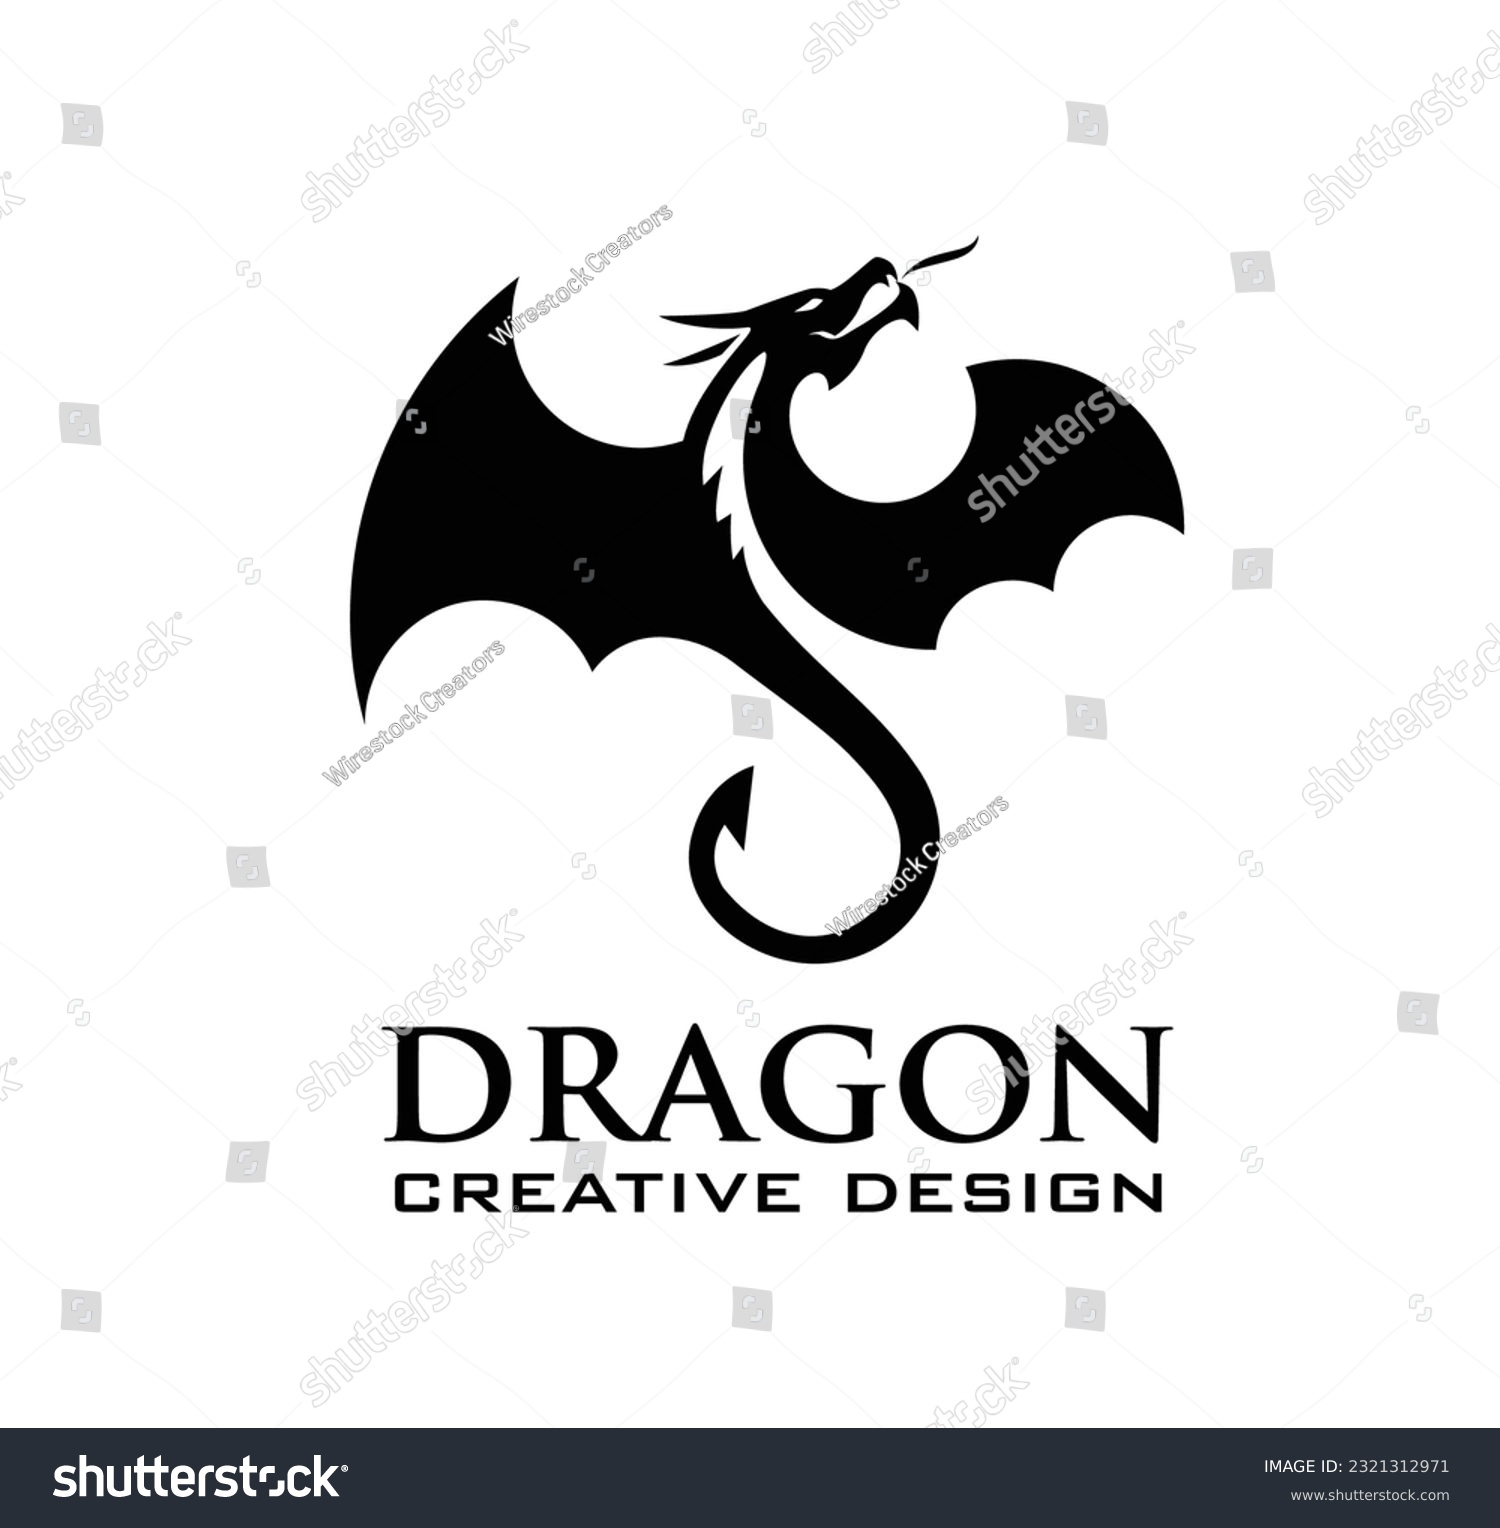 SVG of A black dragon emblem isolated on a white background. svg